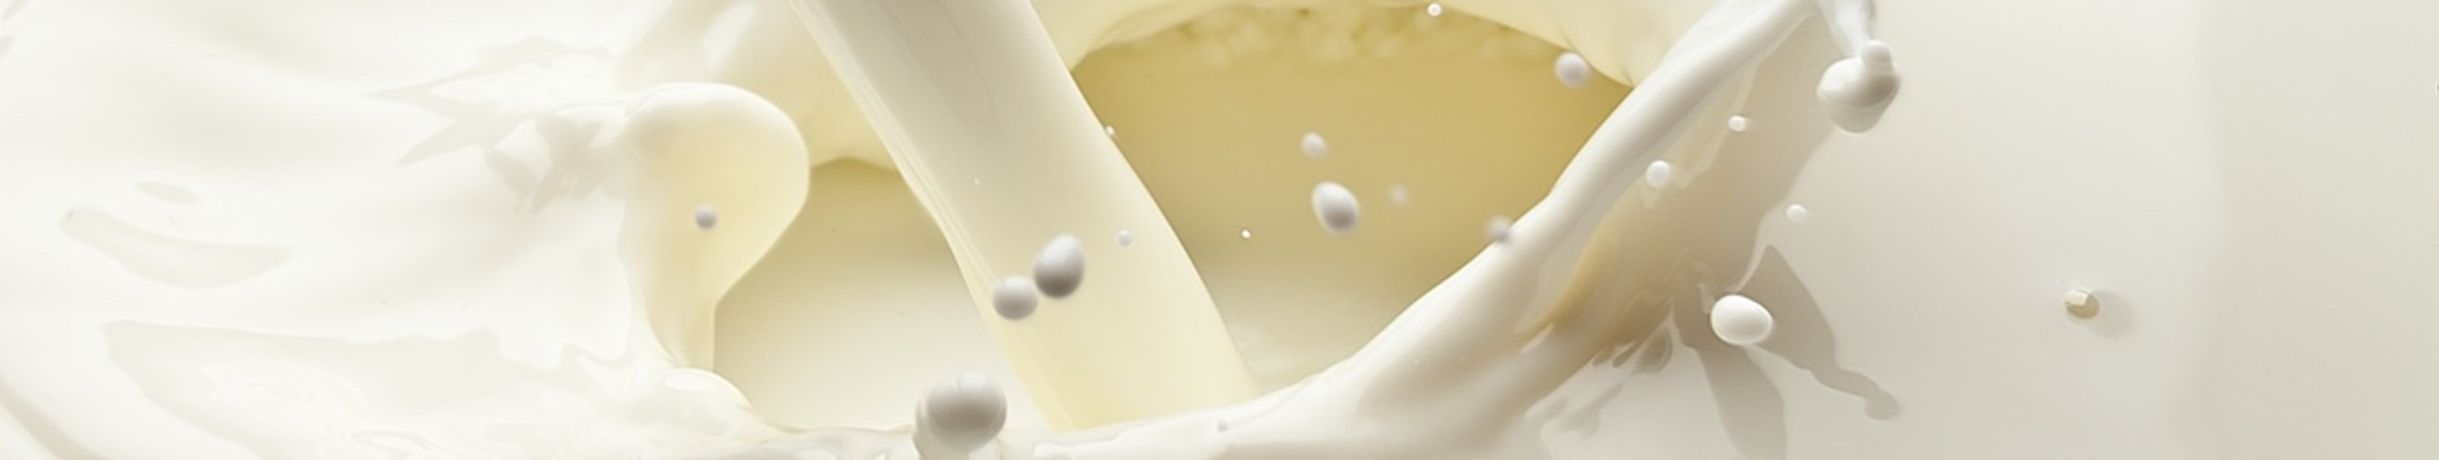 Centrifugation and Separation Technologies for Food Production and Milk Processing - Food and Beverage - Food